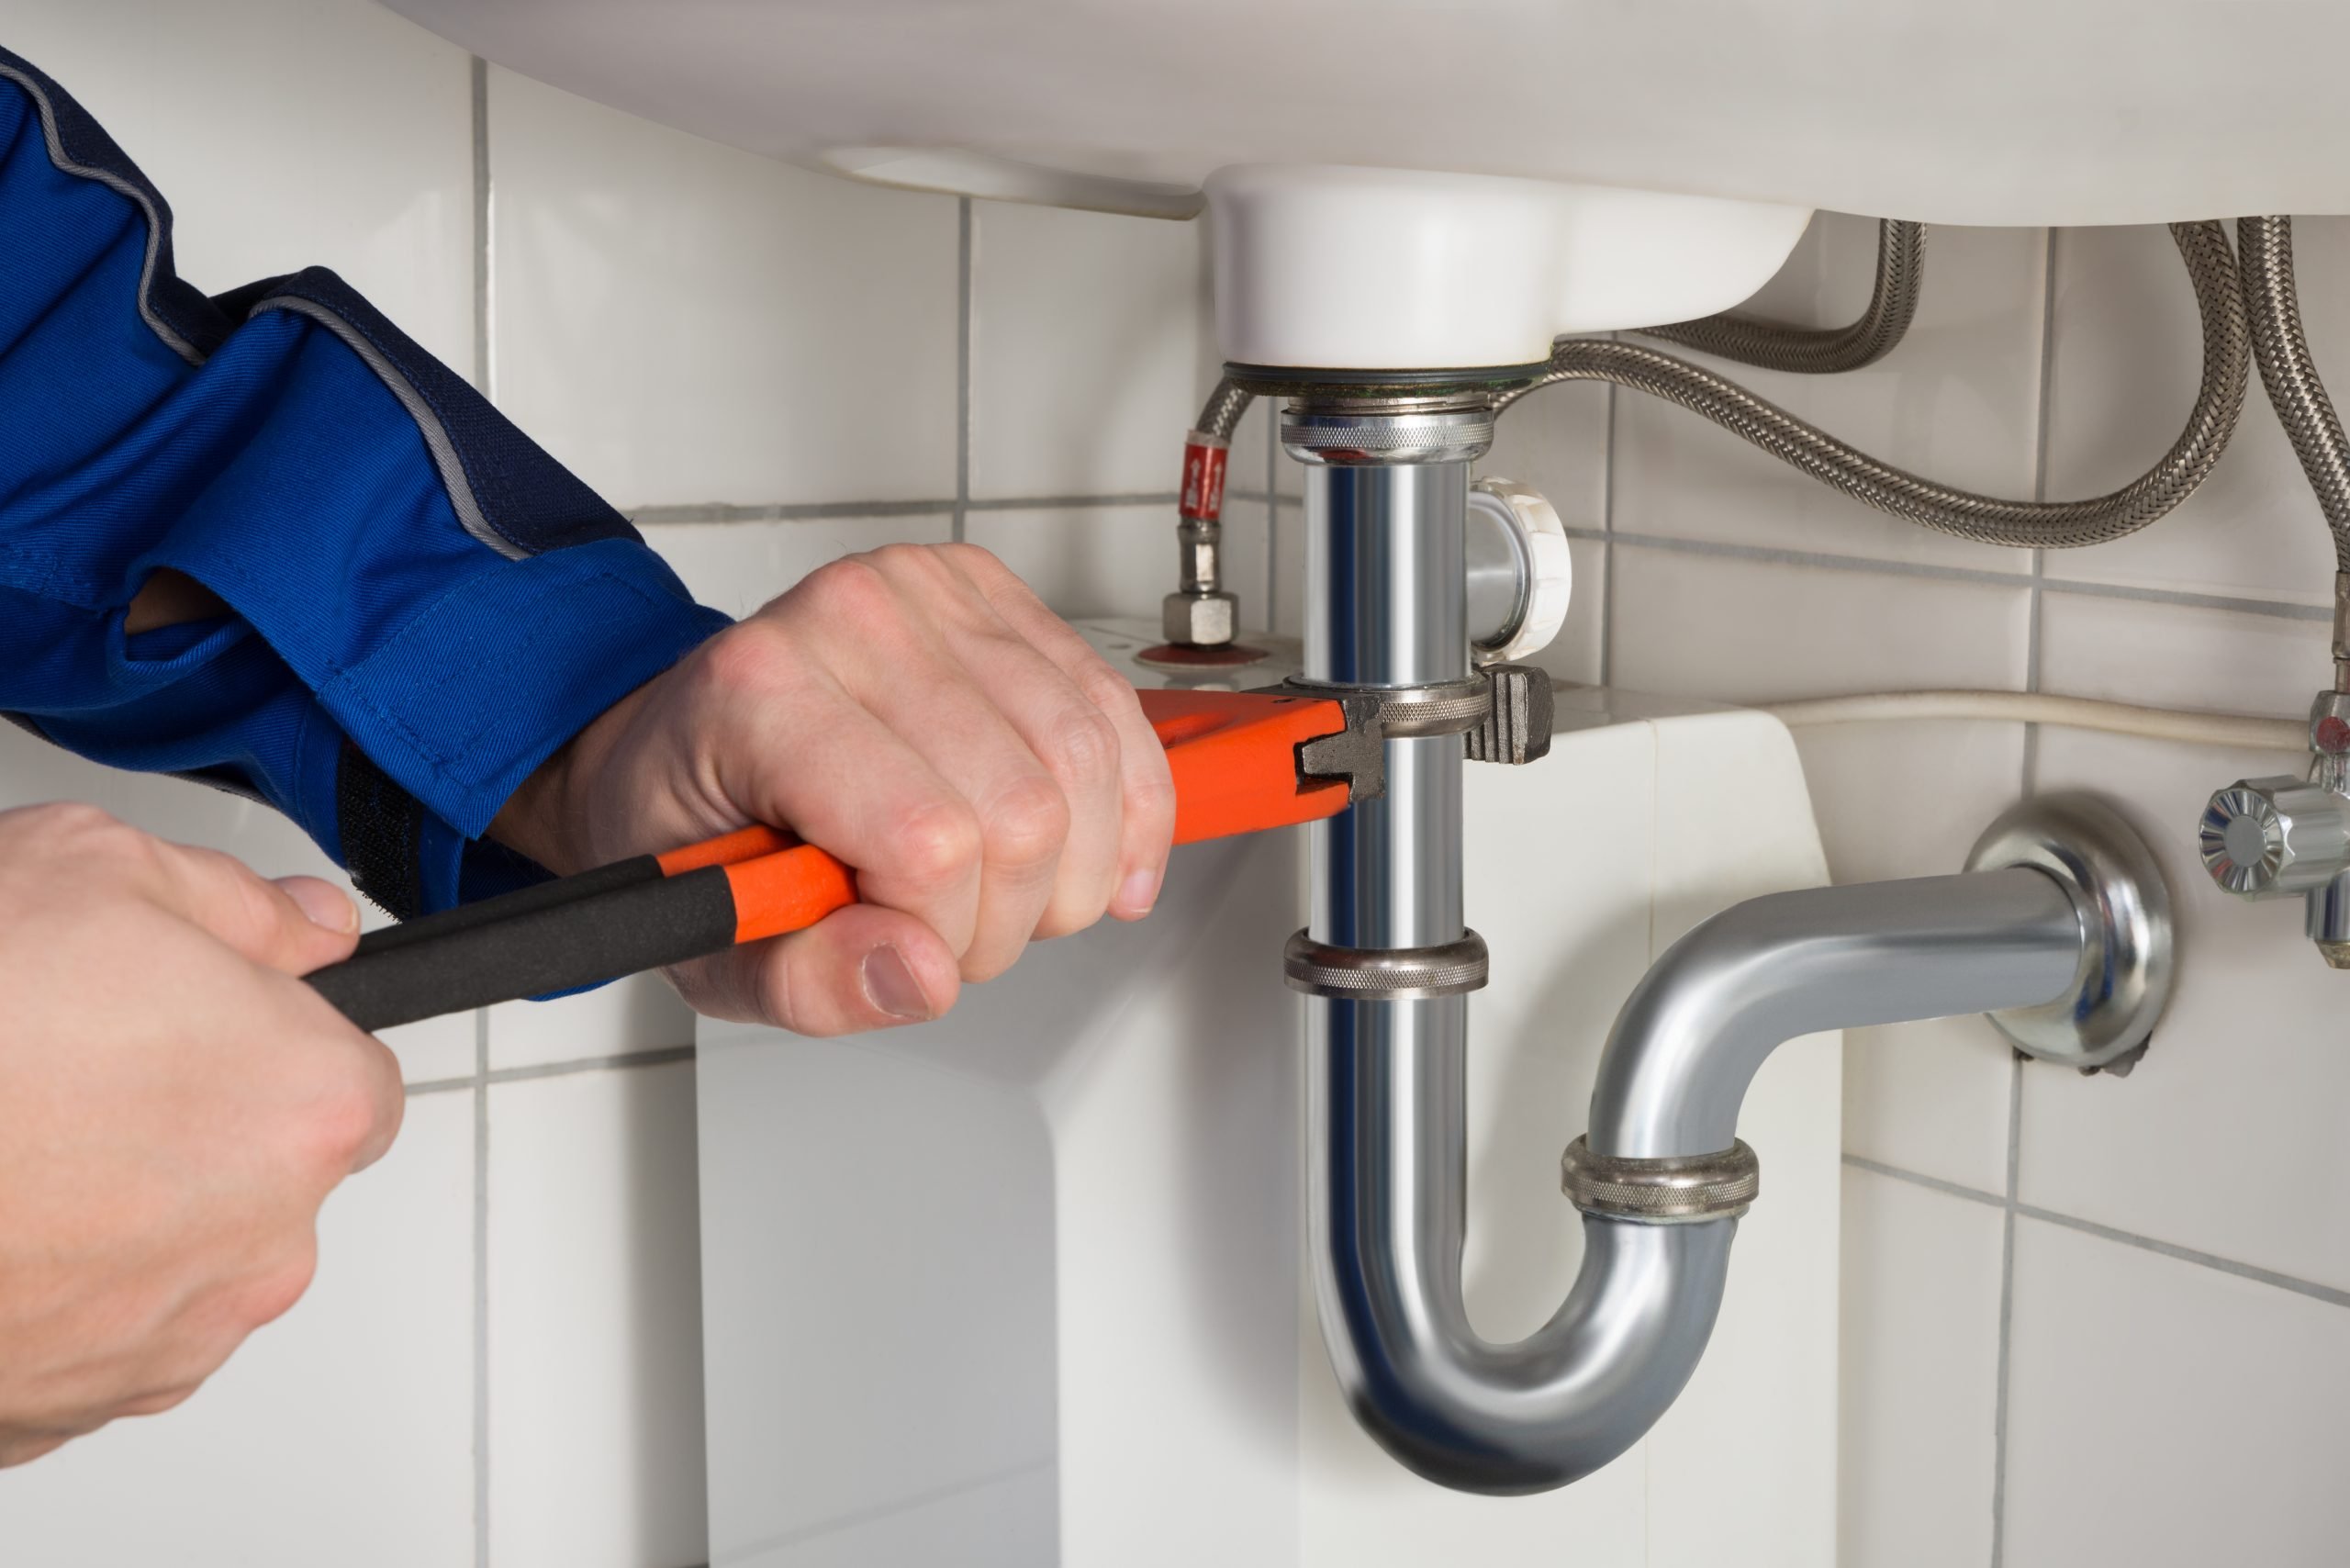 How Much Should a Plumber Charge Per Hour in the UK?